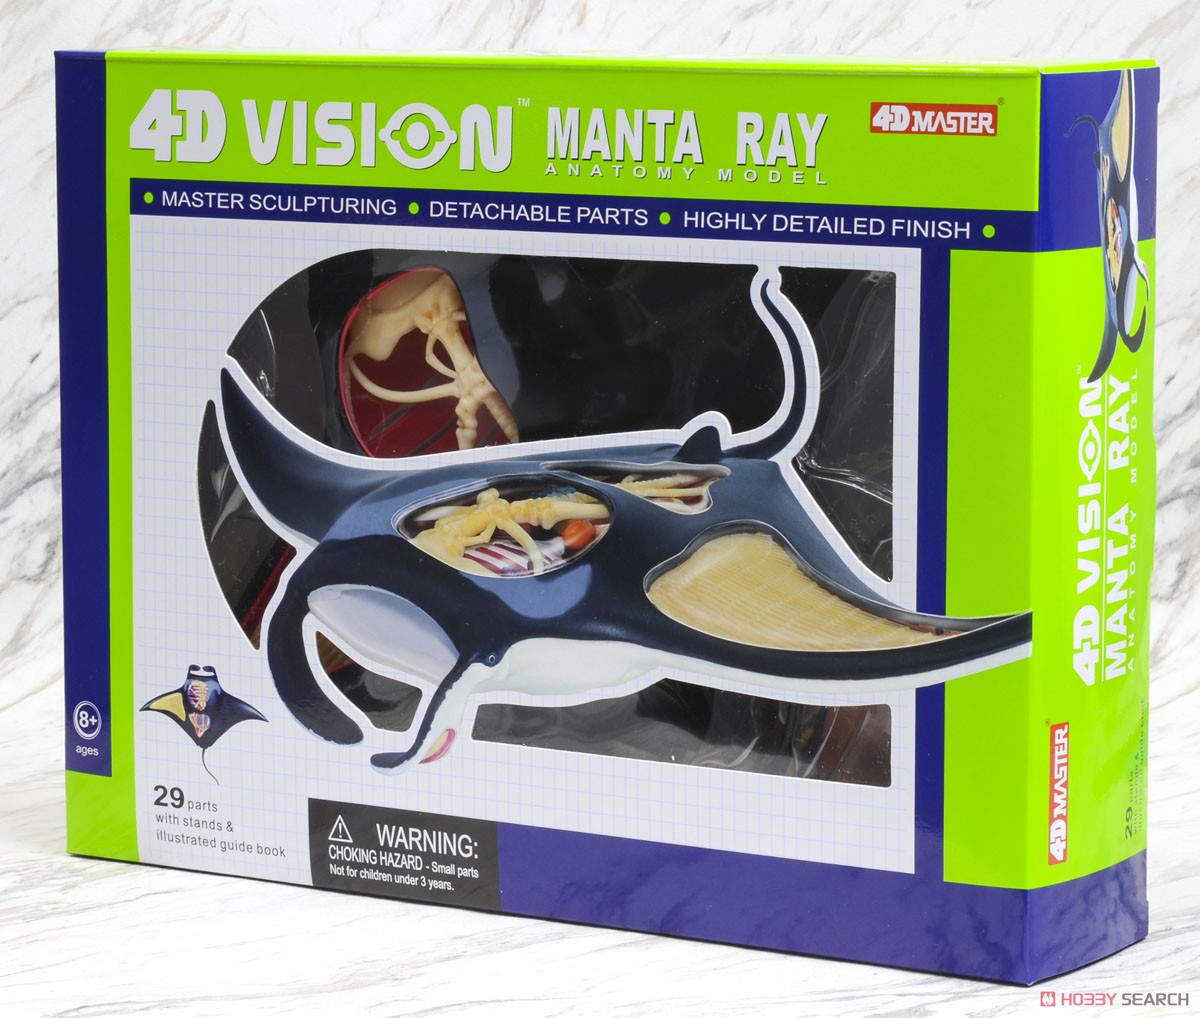 3D Puzzle 4D VISION Zootomy No.30 Manta Ray Anatomy Model (Plastic model) Package1